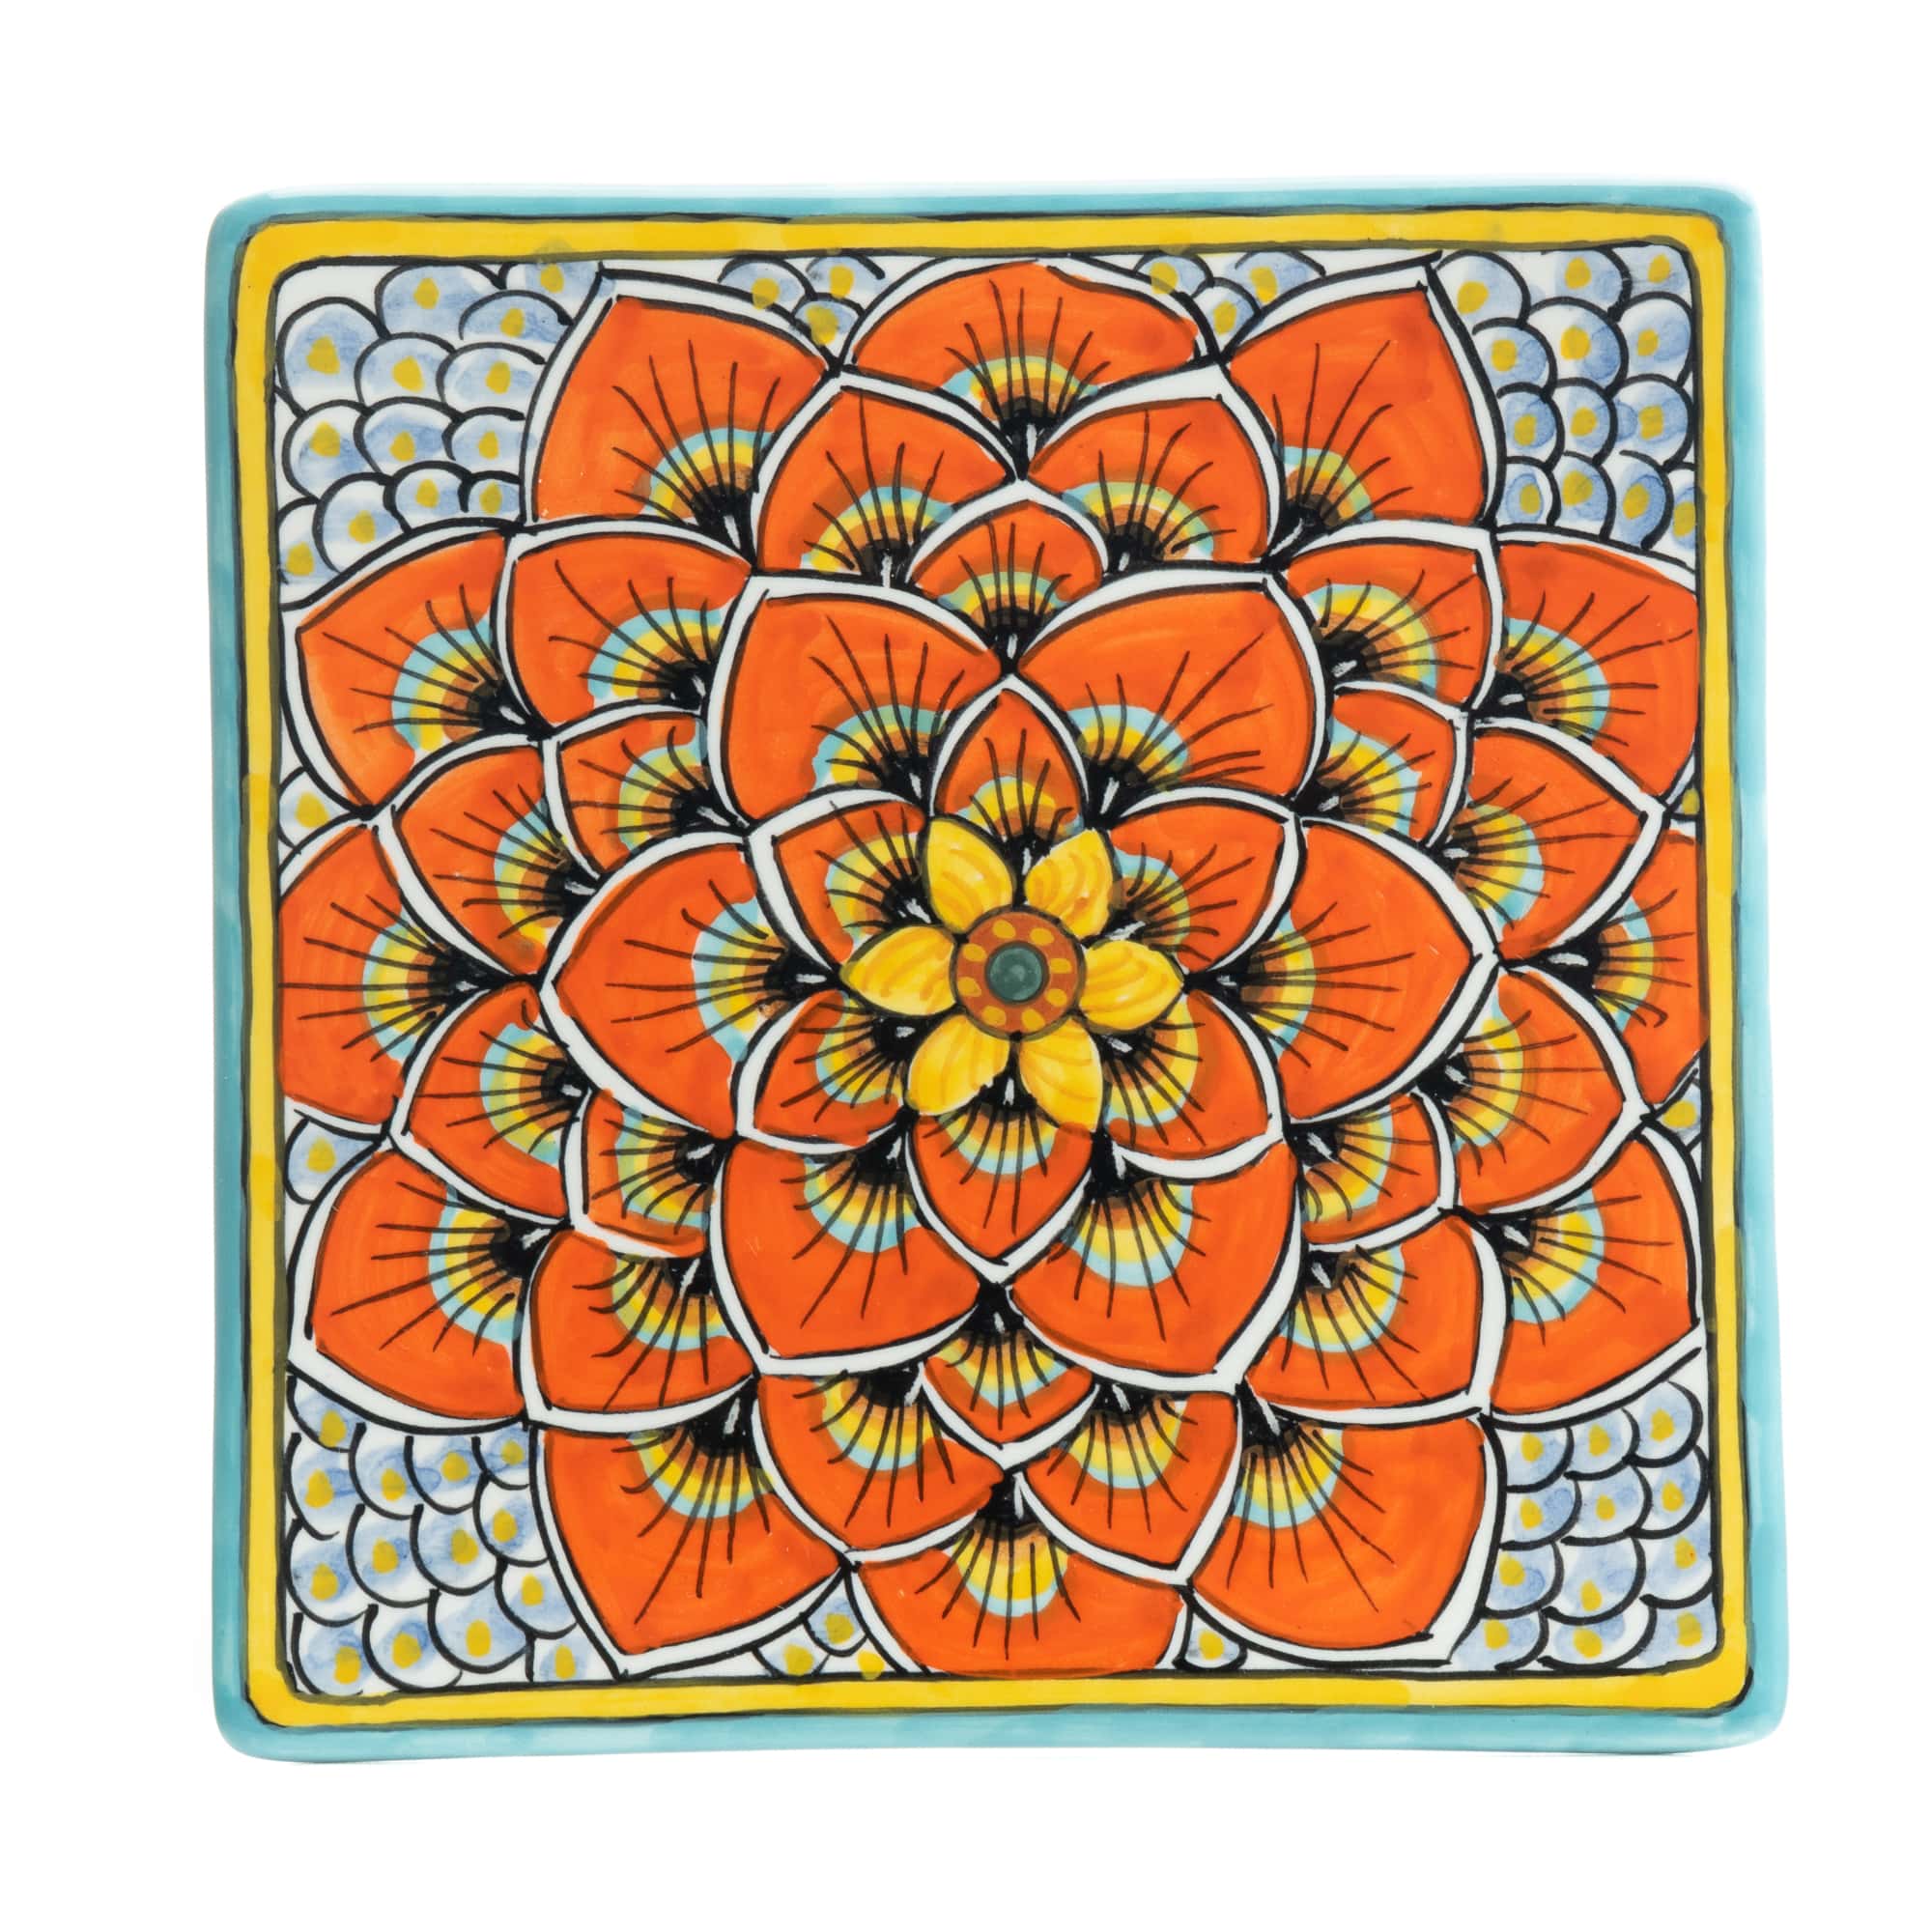 Geribi Square Sushi Plate (PG11) Burnt Orange Peacock Design, ceramics, pottery, italian design, majolica, handmade, handcrafted, handpainted, home decor, kitchen art, home goods, deruta, majolica, Artisan, treasures, traditional art, modern art, gift ideas, style, SF, shop small business, artists, shop online, landmark store, legacy, one of a kind, limited edition, gift guide, gift shop, retail shop, decorations, shopping, italy, home staging, home decorating, home interiors